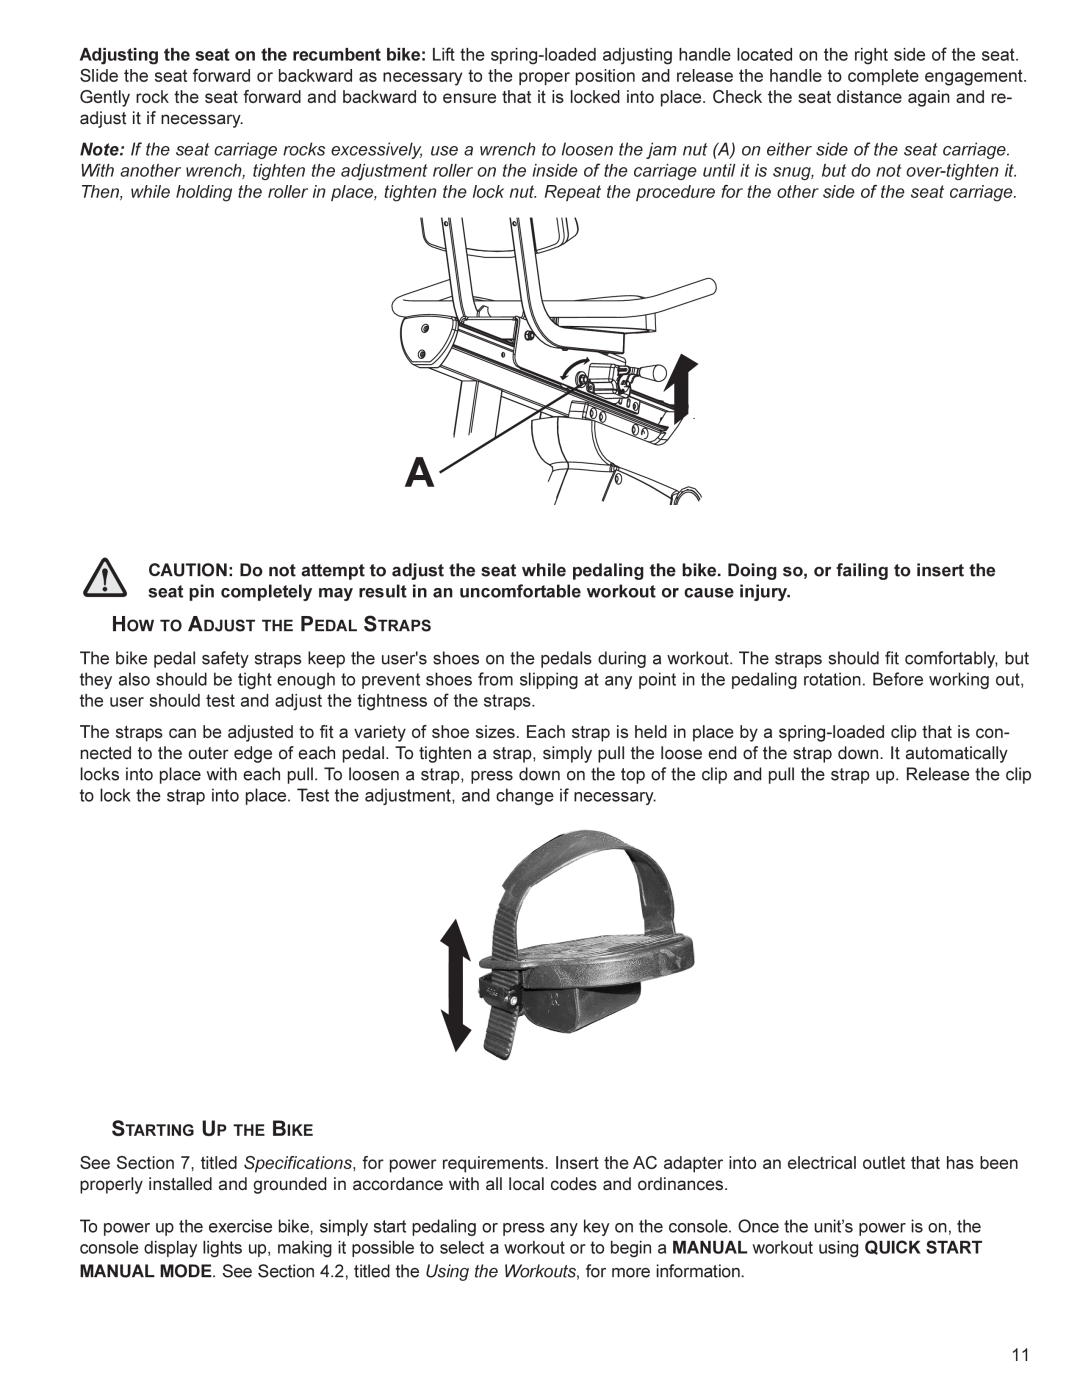 Life Fitness UT4, RT4 user manual How To Adjust The Pedal Straps, Starting Up The Bike 